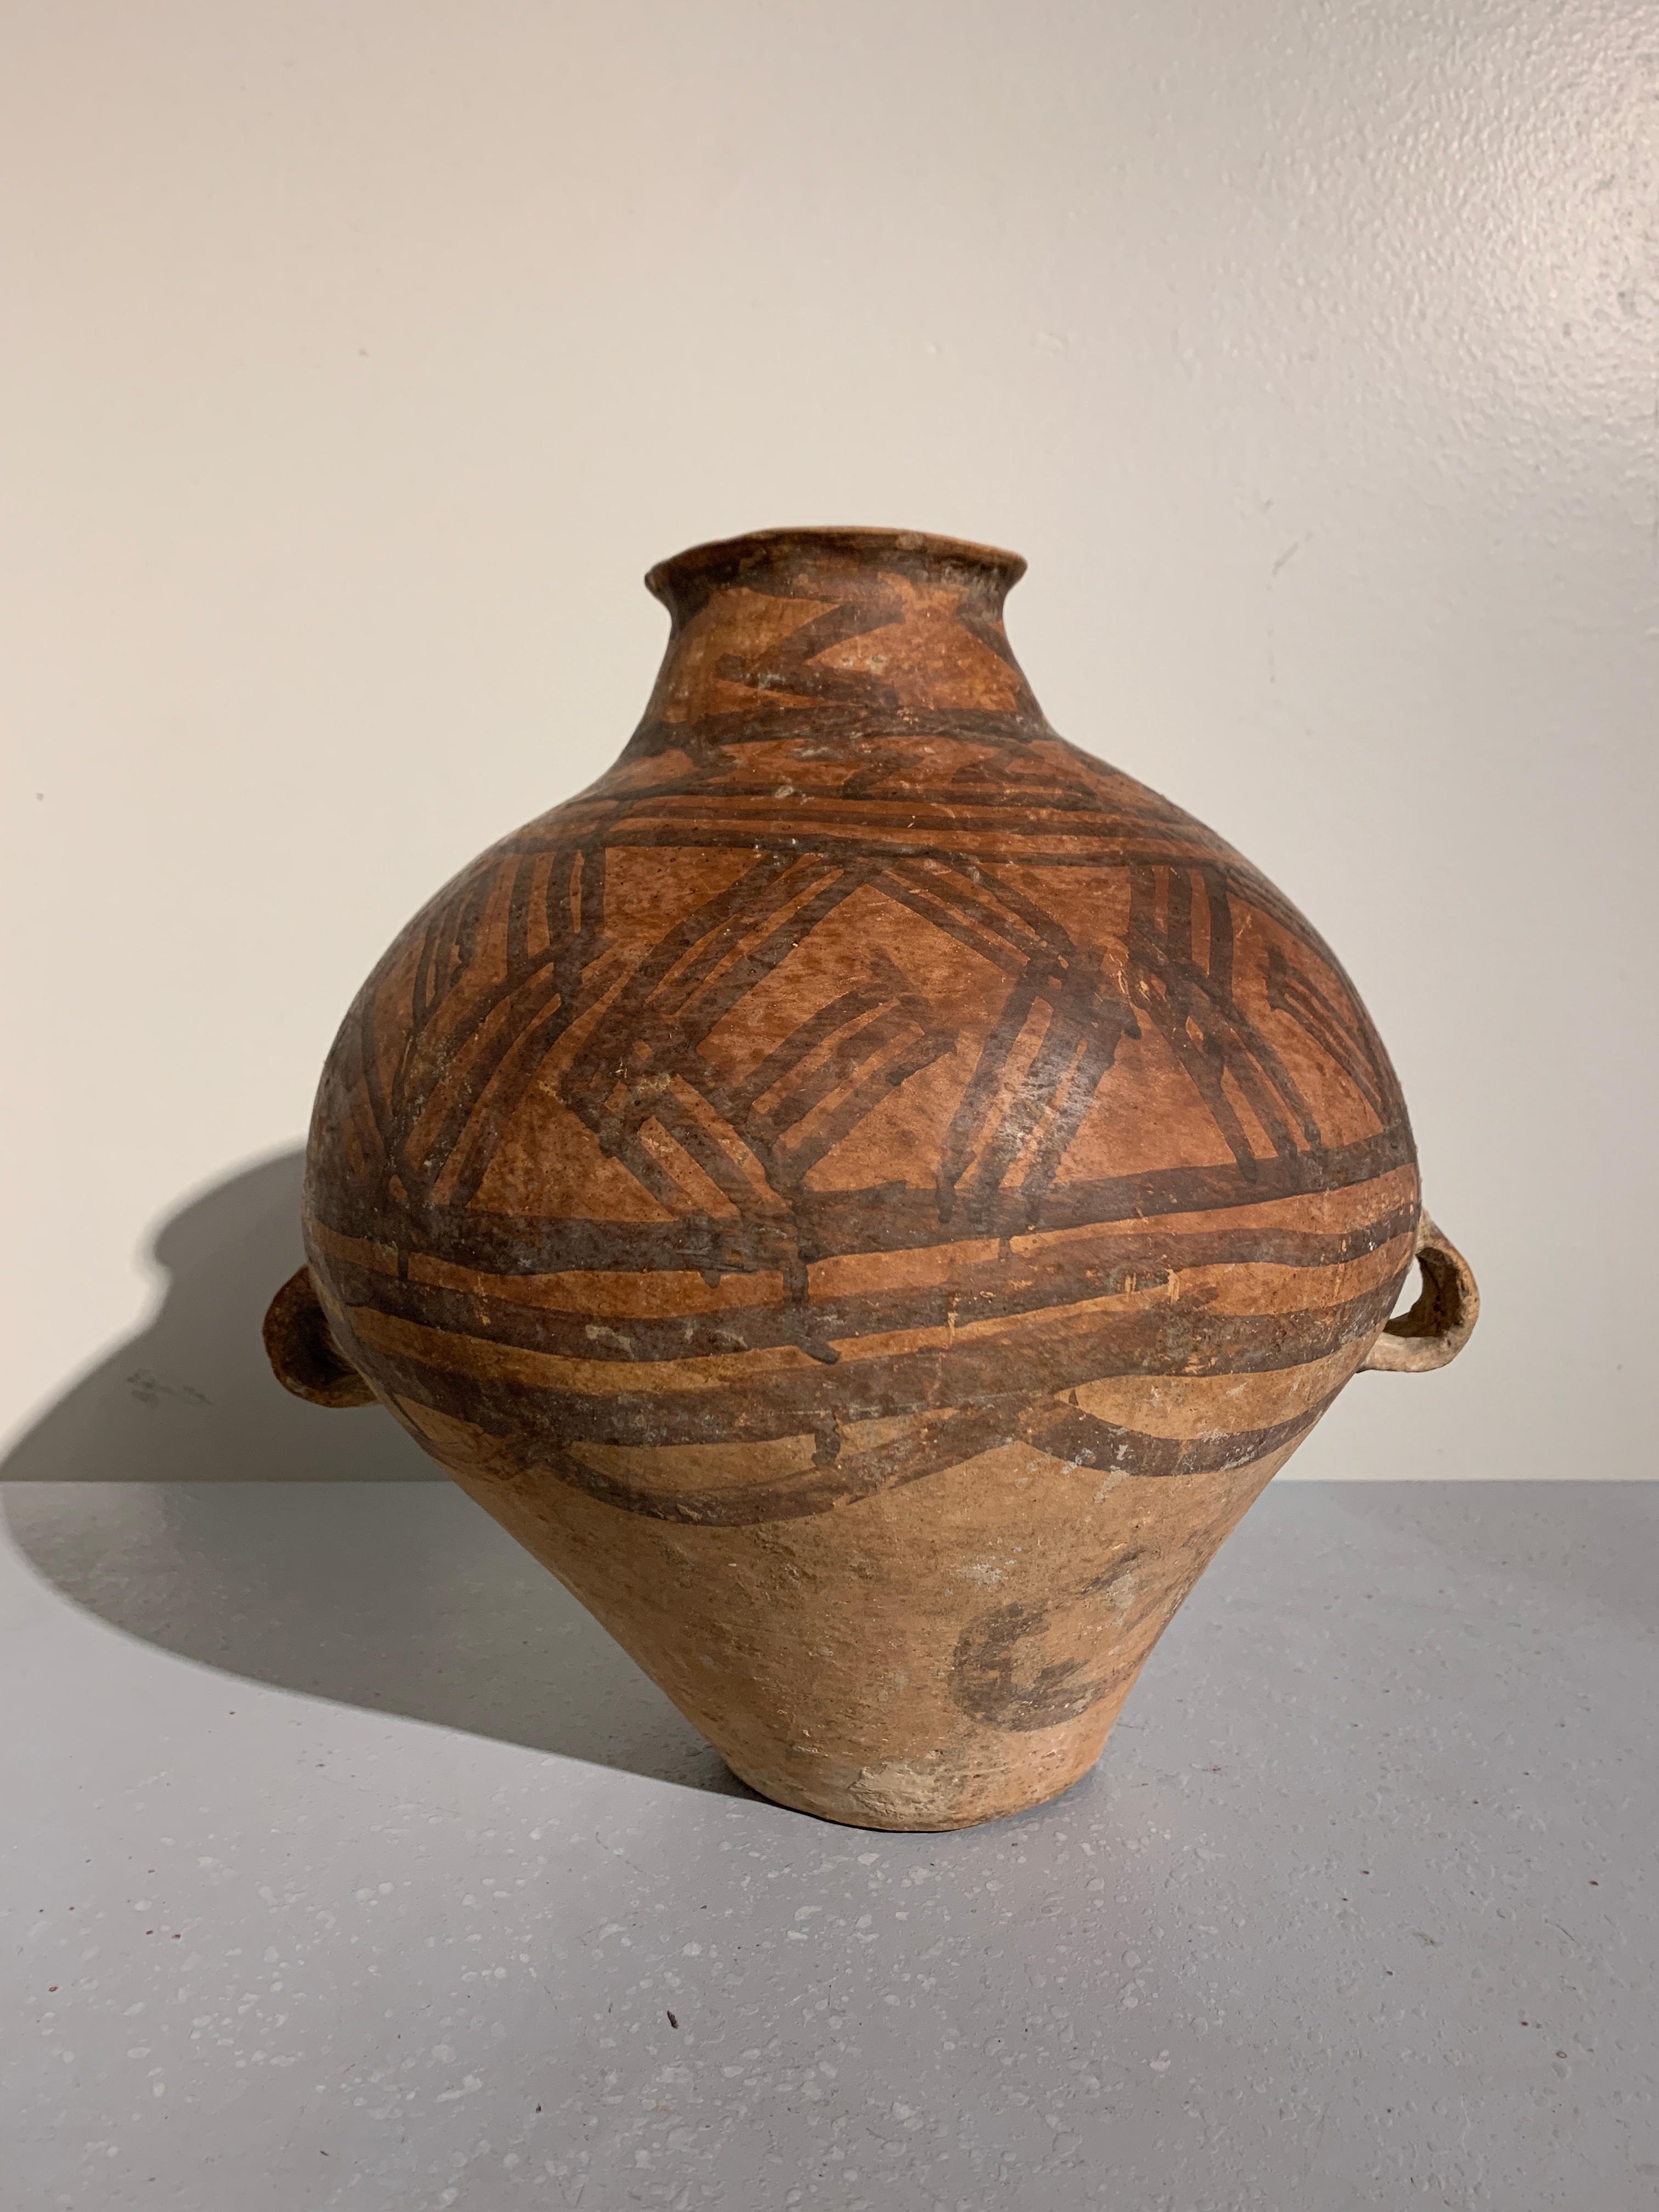 A rustic Chinese Neolithic bronze age pottery amphora with painted geometric design, Yangshao Culture (5000-3000 BC), circa 3500 BC, China.

The vessel of amphora form, with a narrow neck and two strap handles. The body of baluster form, with